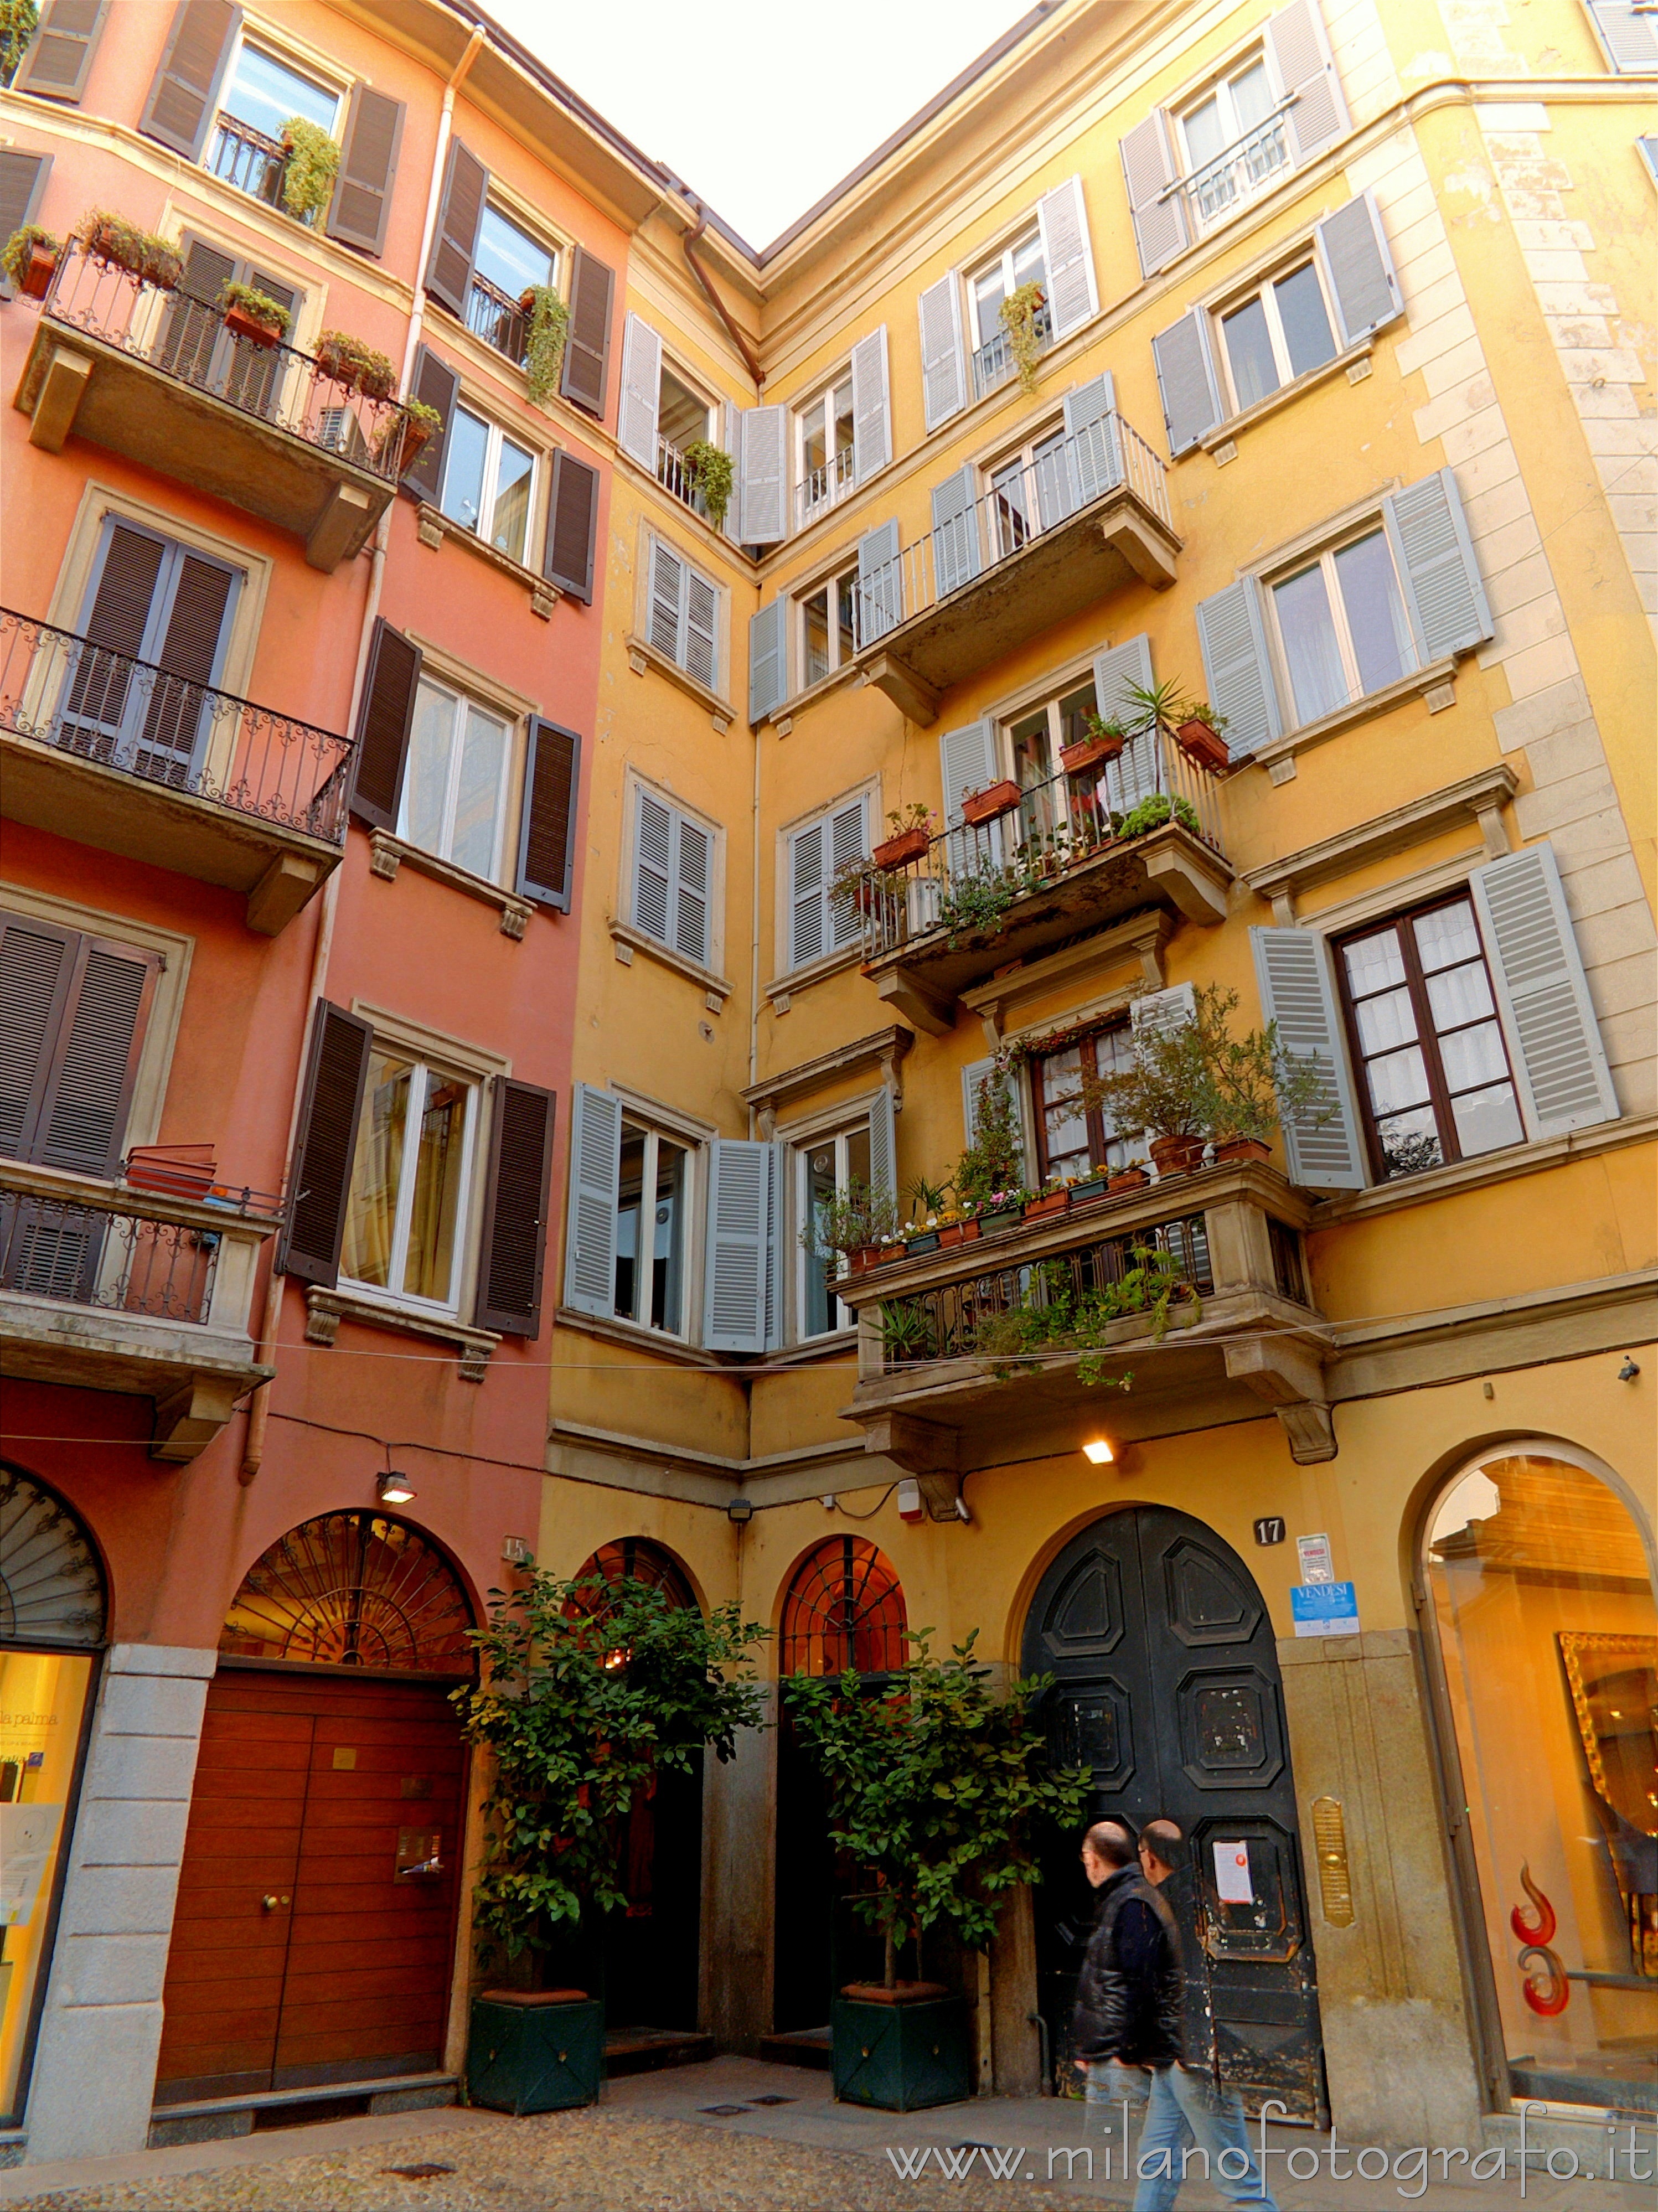 Milan (Italy): Houses in the Brera district - Milan (Italy)